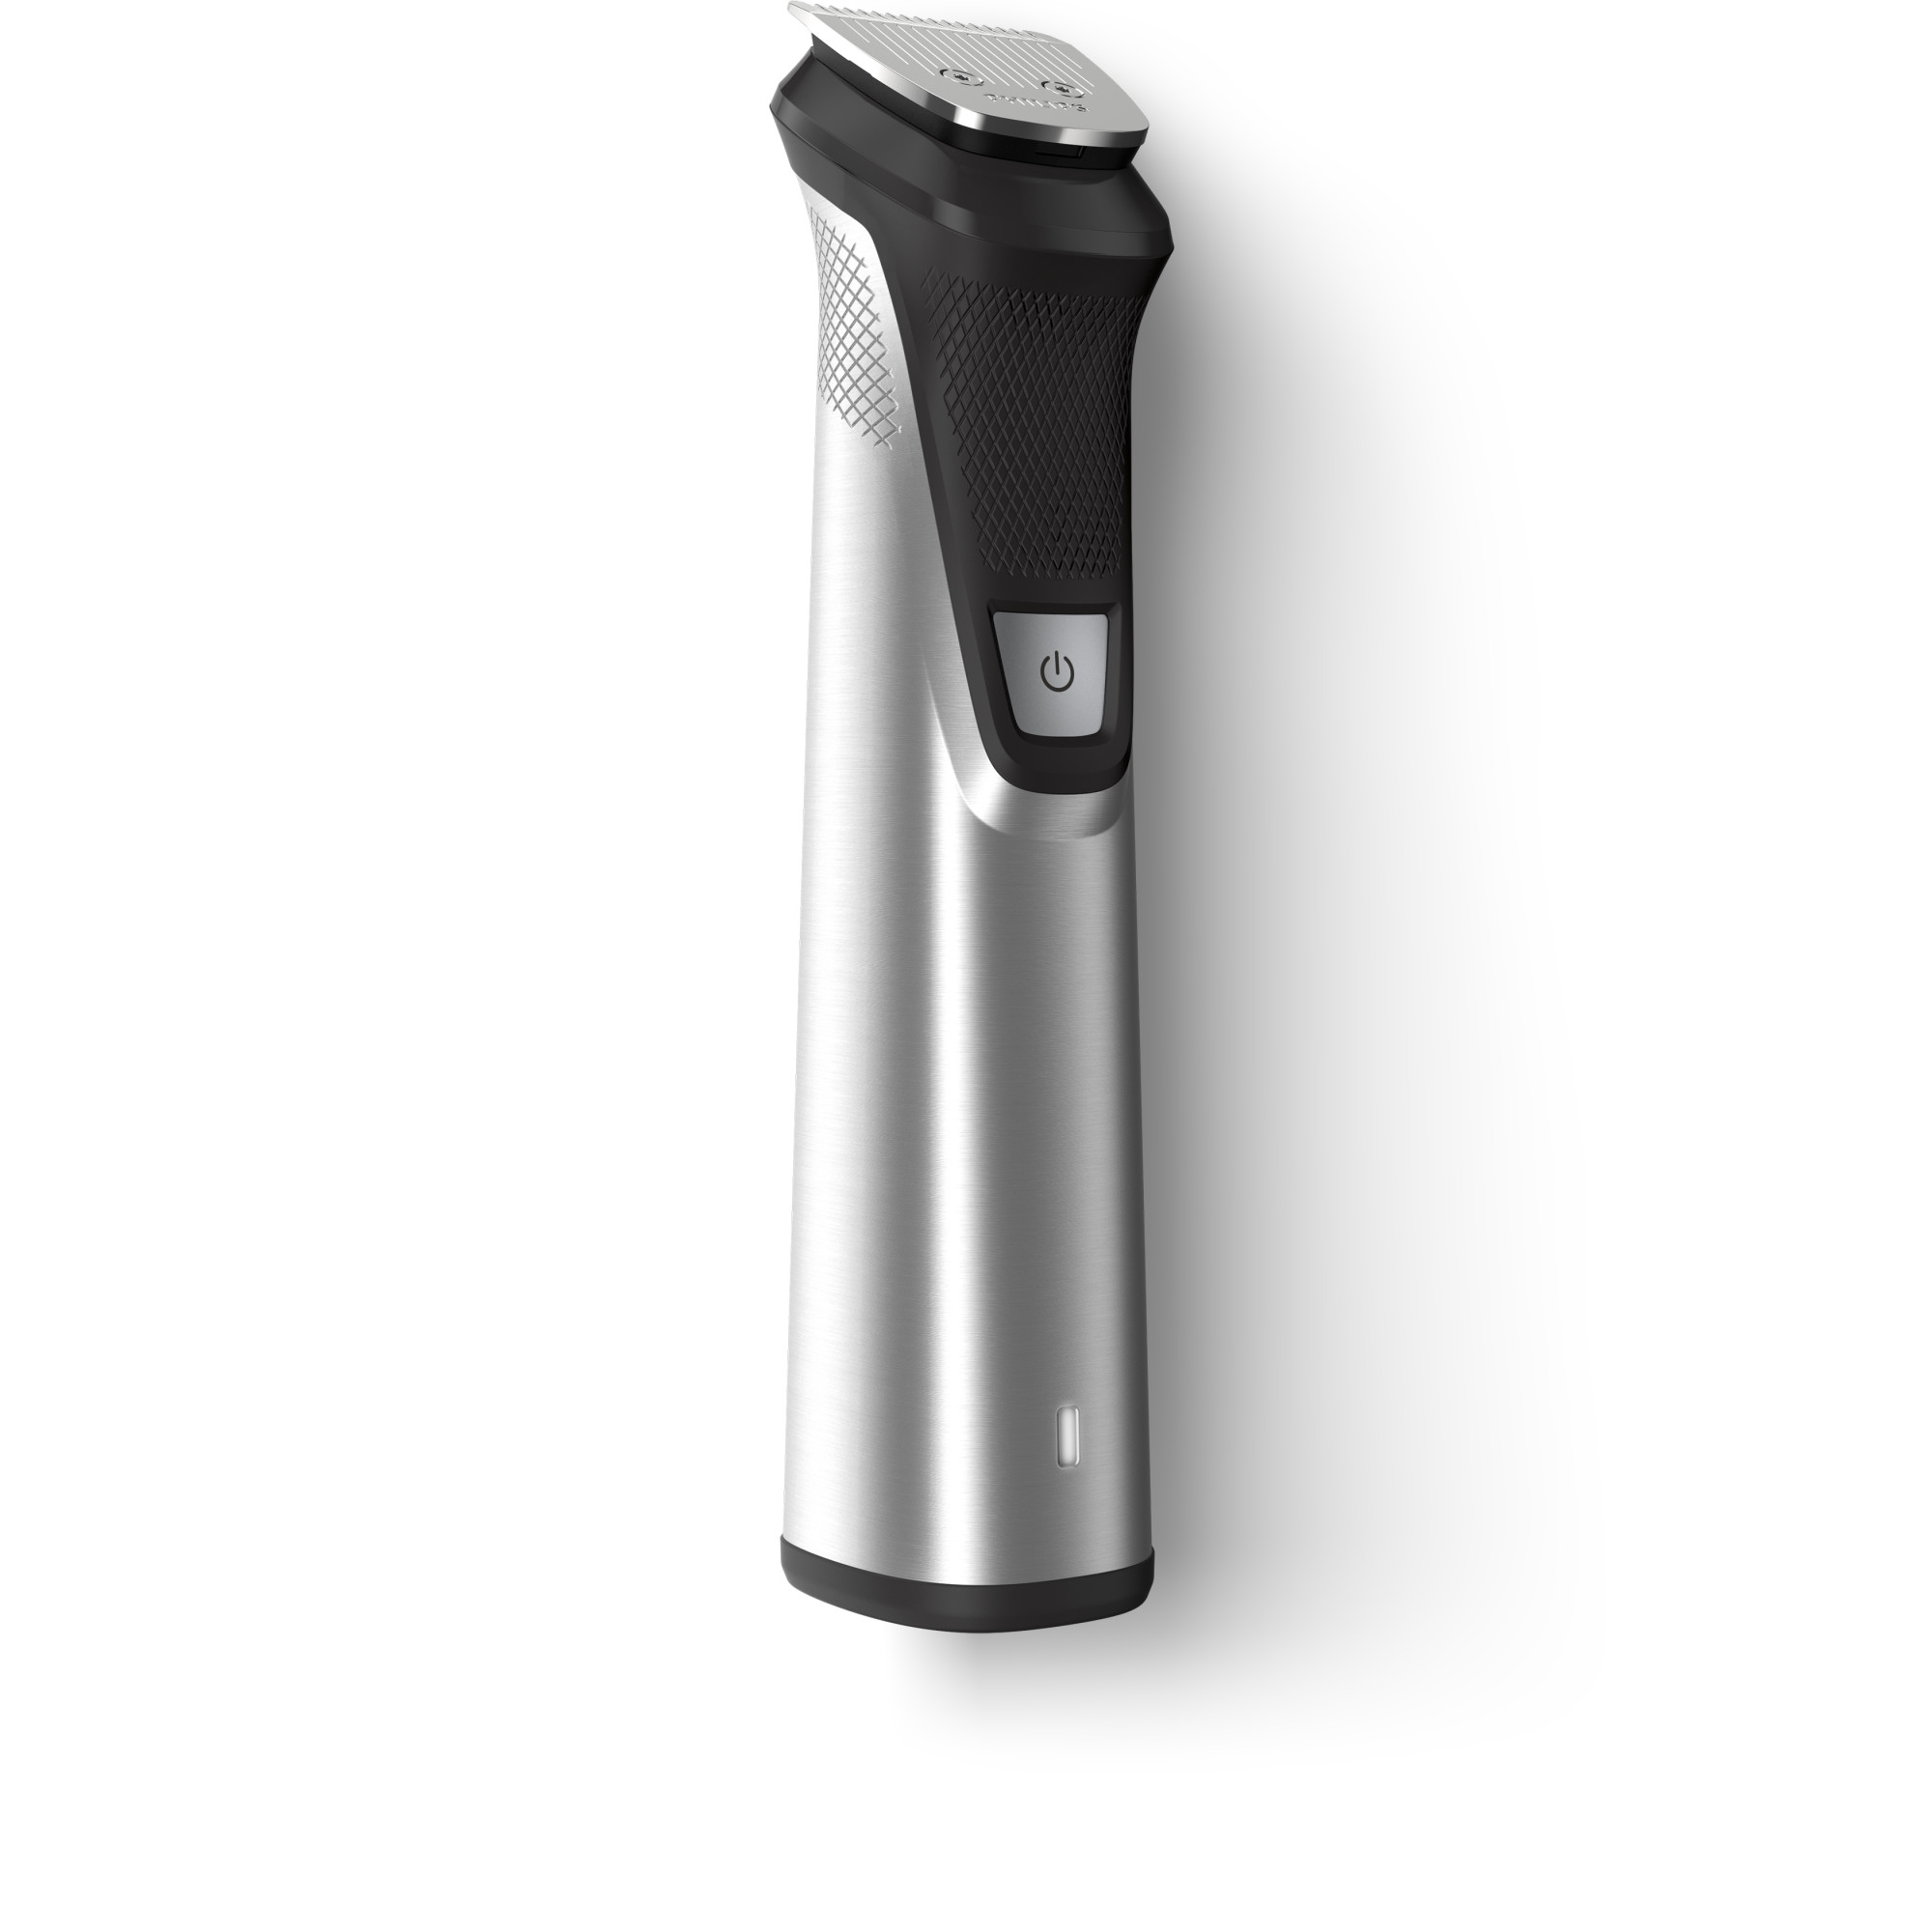 Philips Norelco Multigroom Series 7000 23 Piece Mens Grooming Kit, Trimmer For Beard, Head, Body, and Face - No Blade Oil Needed, MG7750/49 - image 17 of 21